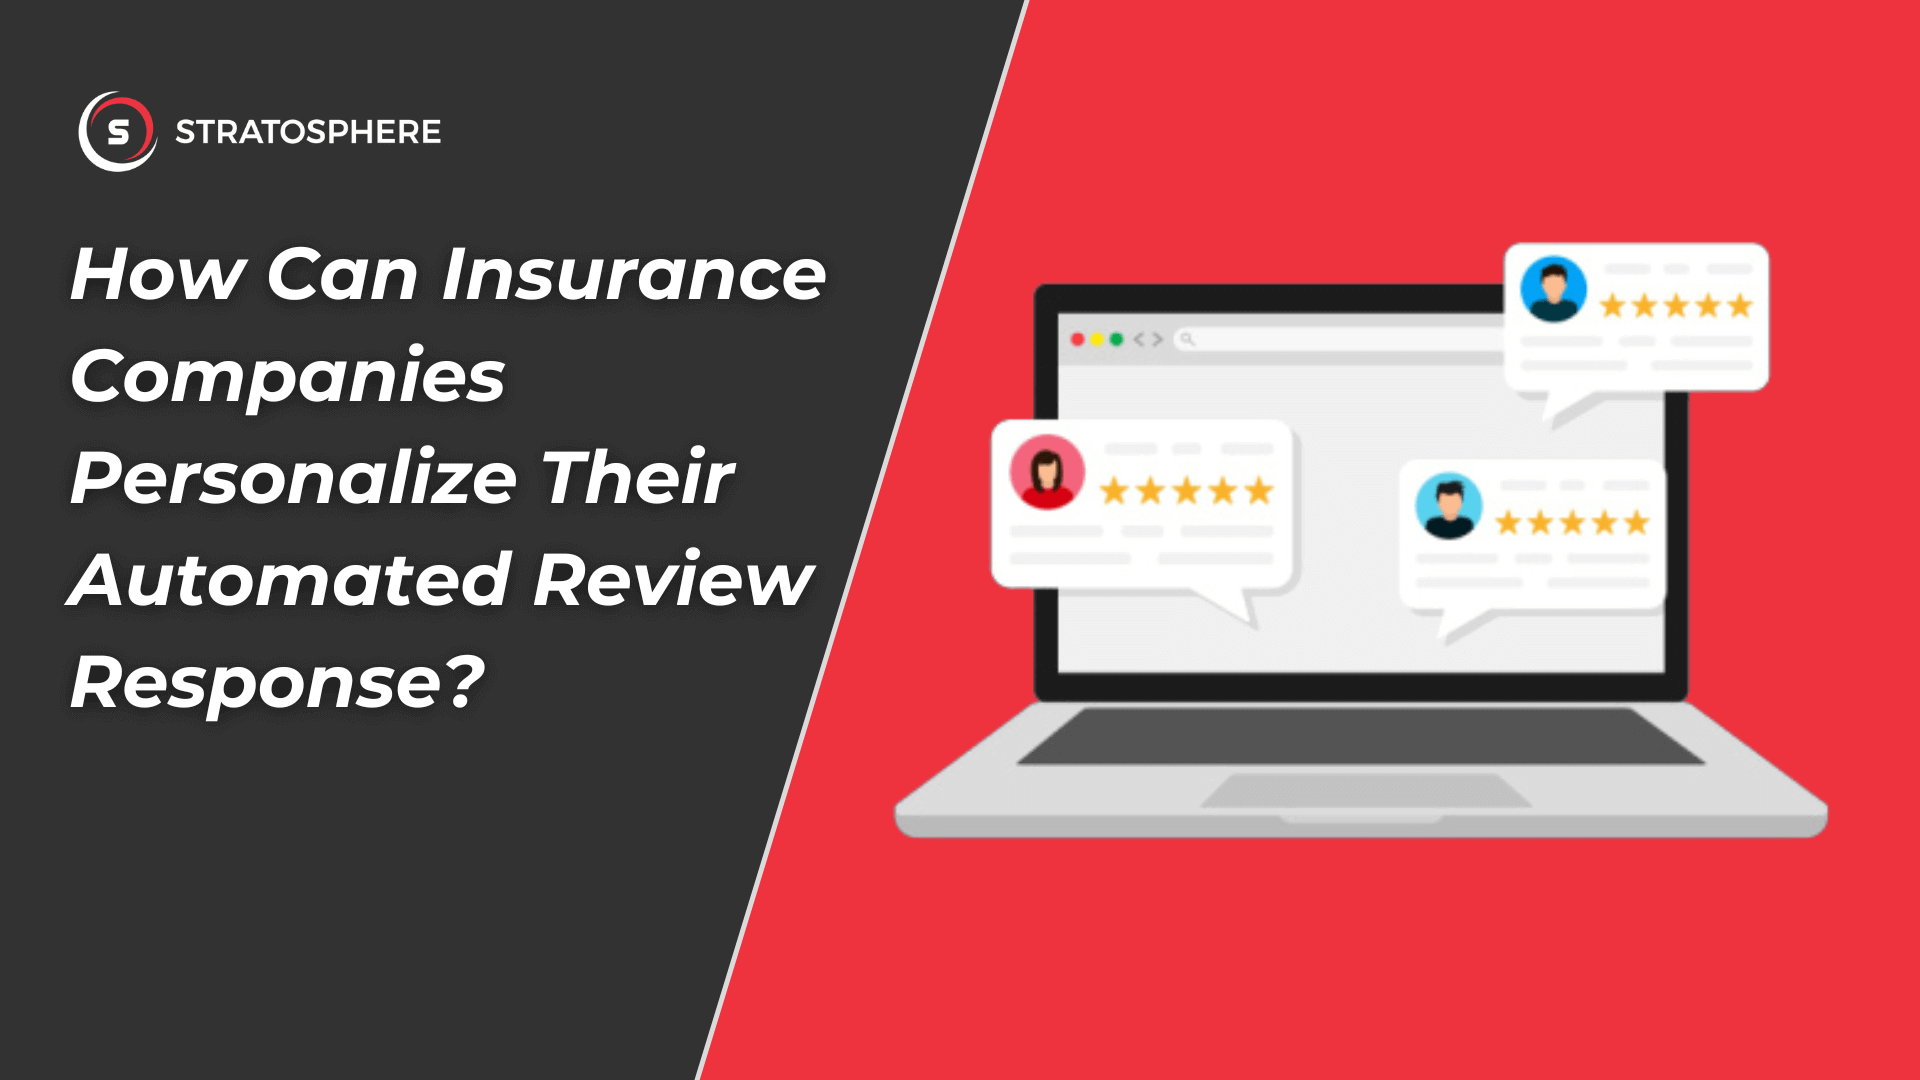 How Can Insurance Companies Personalize Their Automated Review Response?